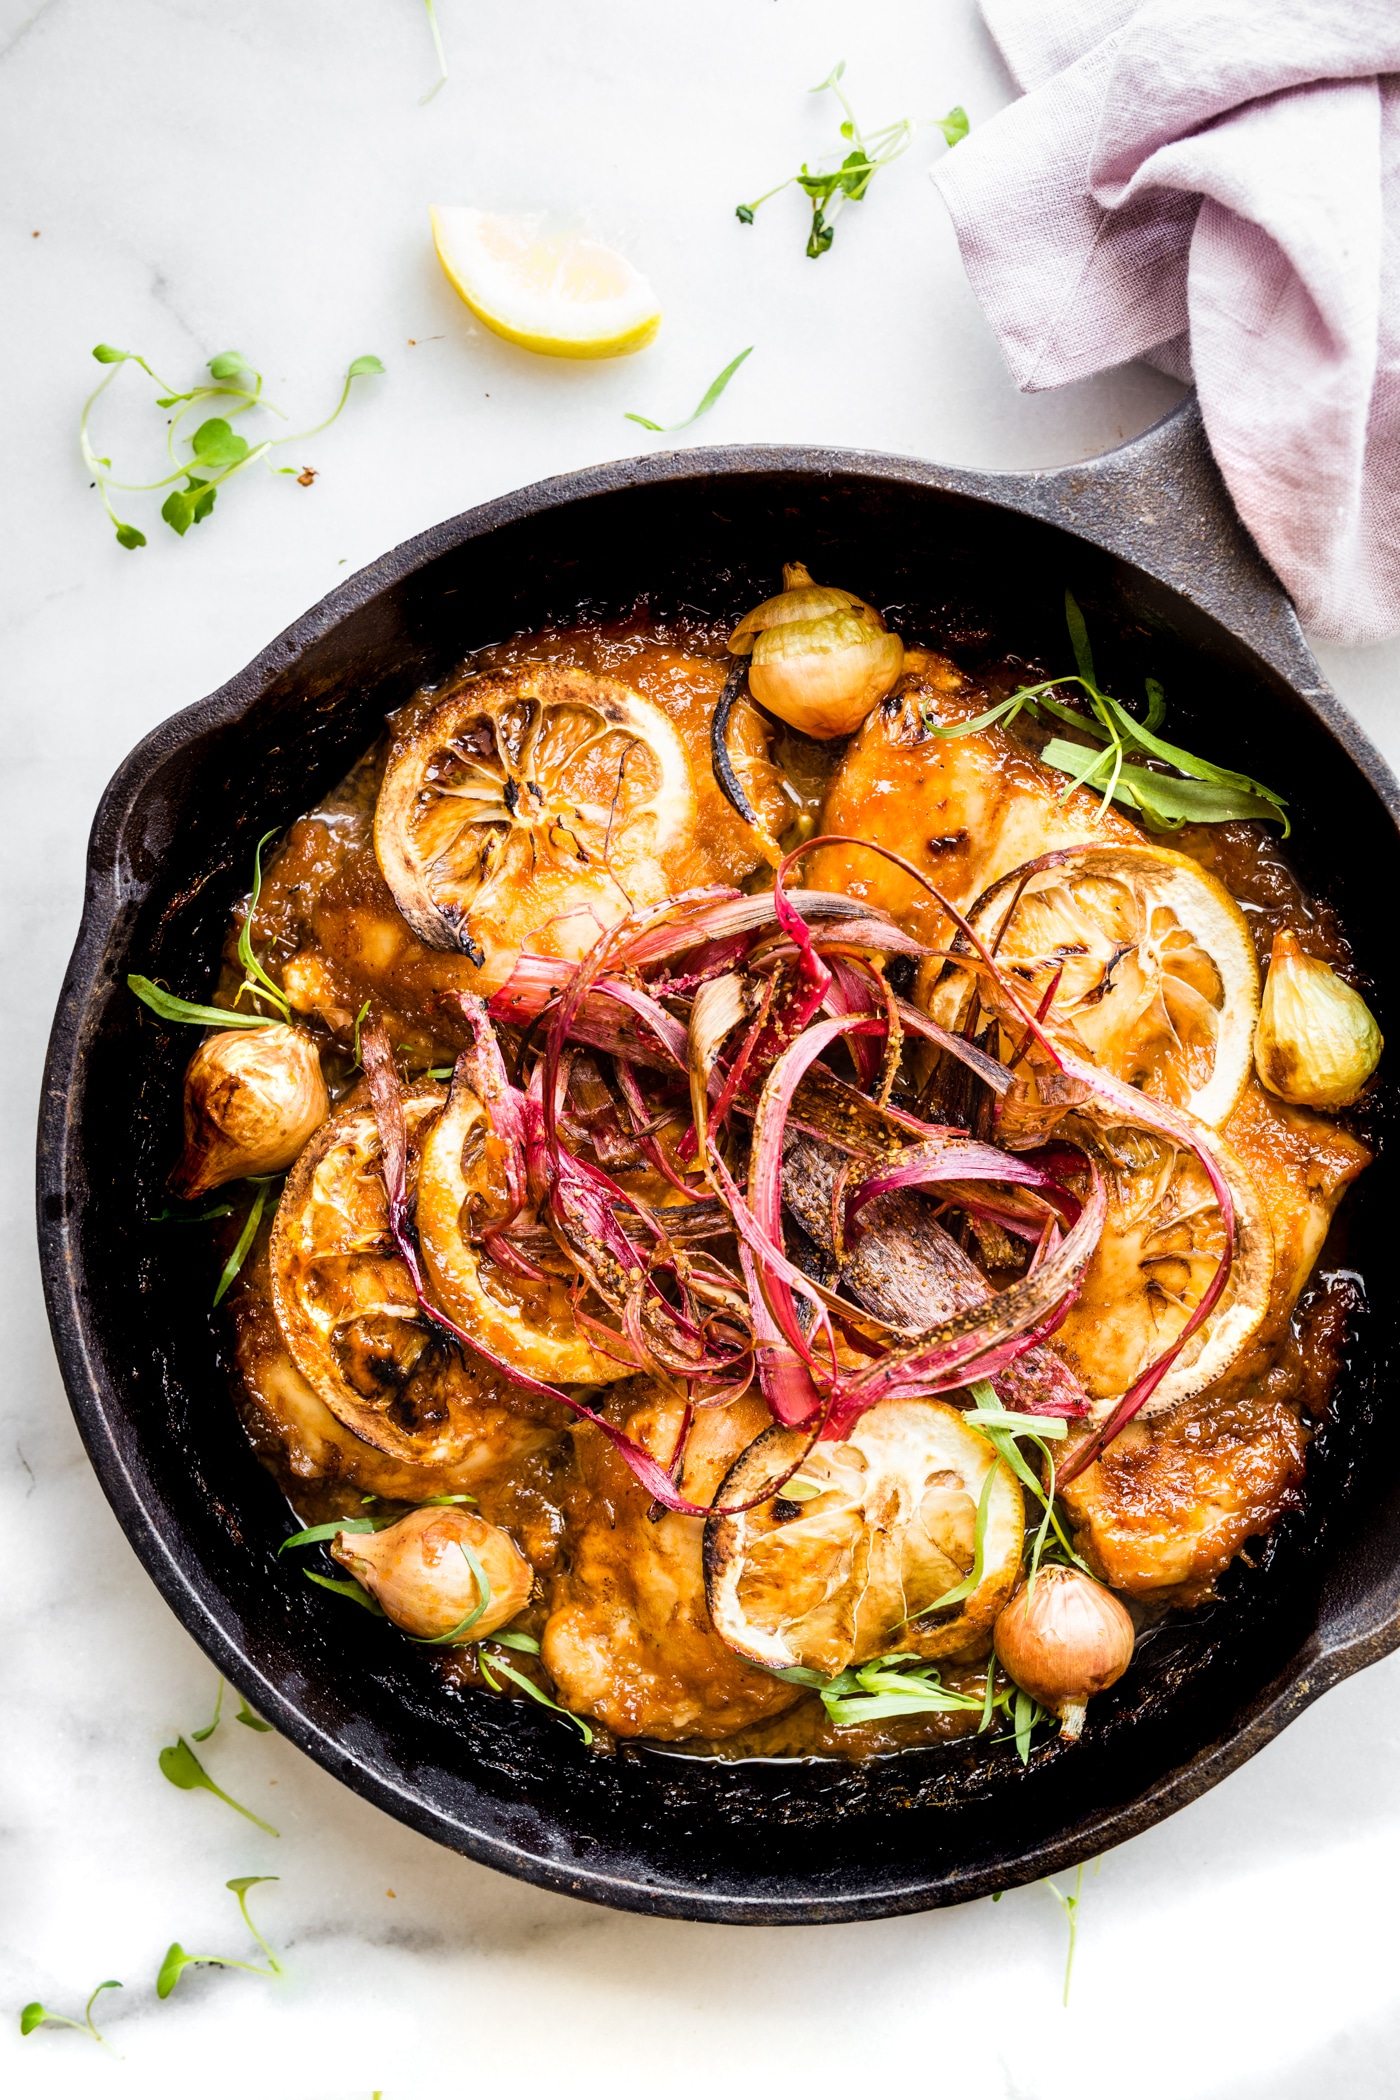 Crispy Rhubarb Baked Chicken in a cast iron skillet